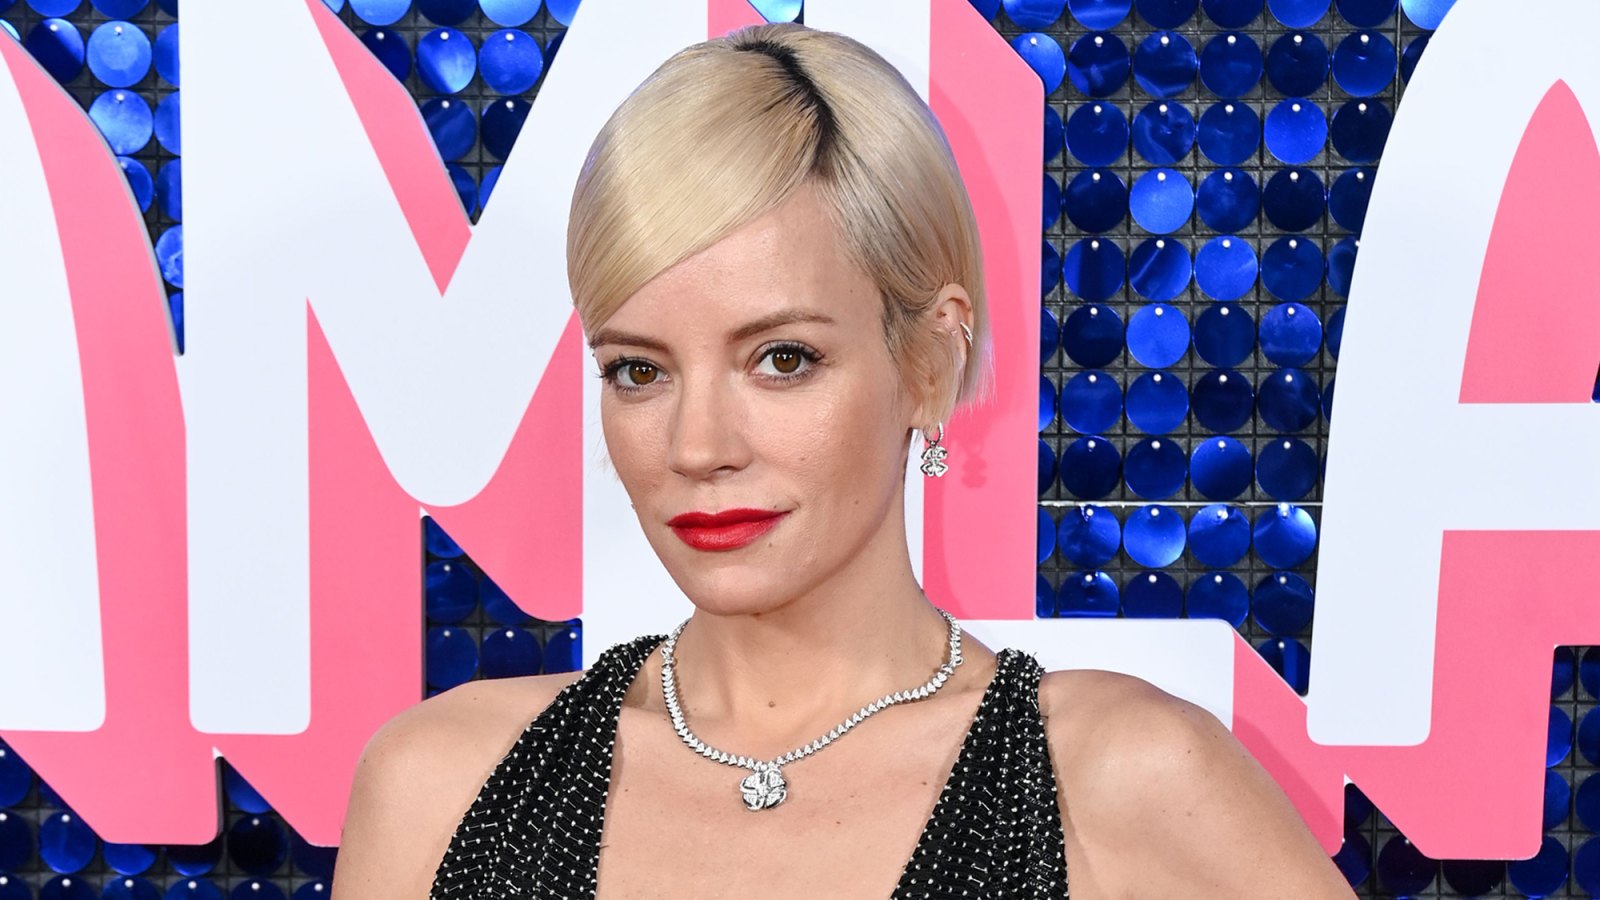 Lily Allen’s Dad Called the Cops When She 'Went Missing' at Age 12 — After Losing Her Virginity